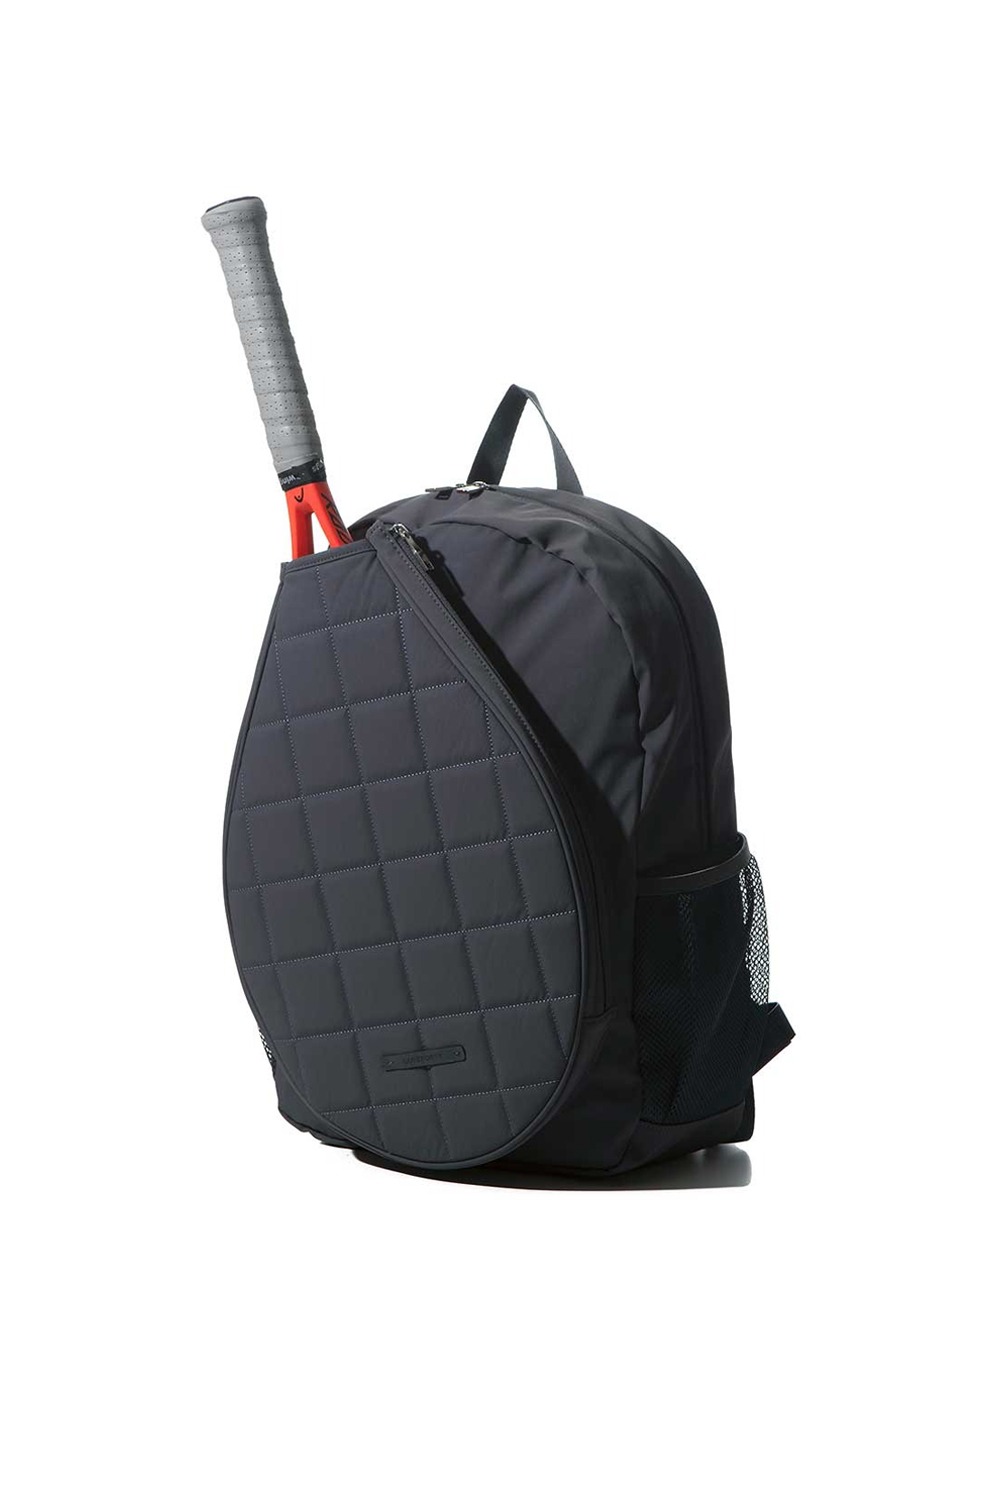 LOVEFORTY QUILTING RACKET BACKPACK (GREY) RICHEZ